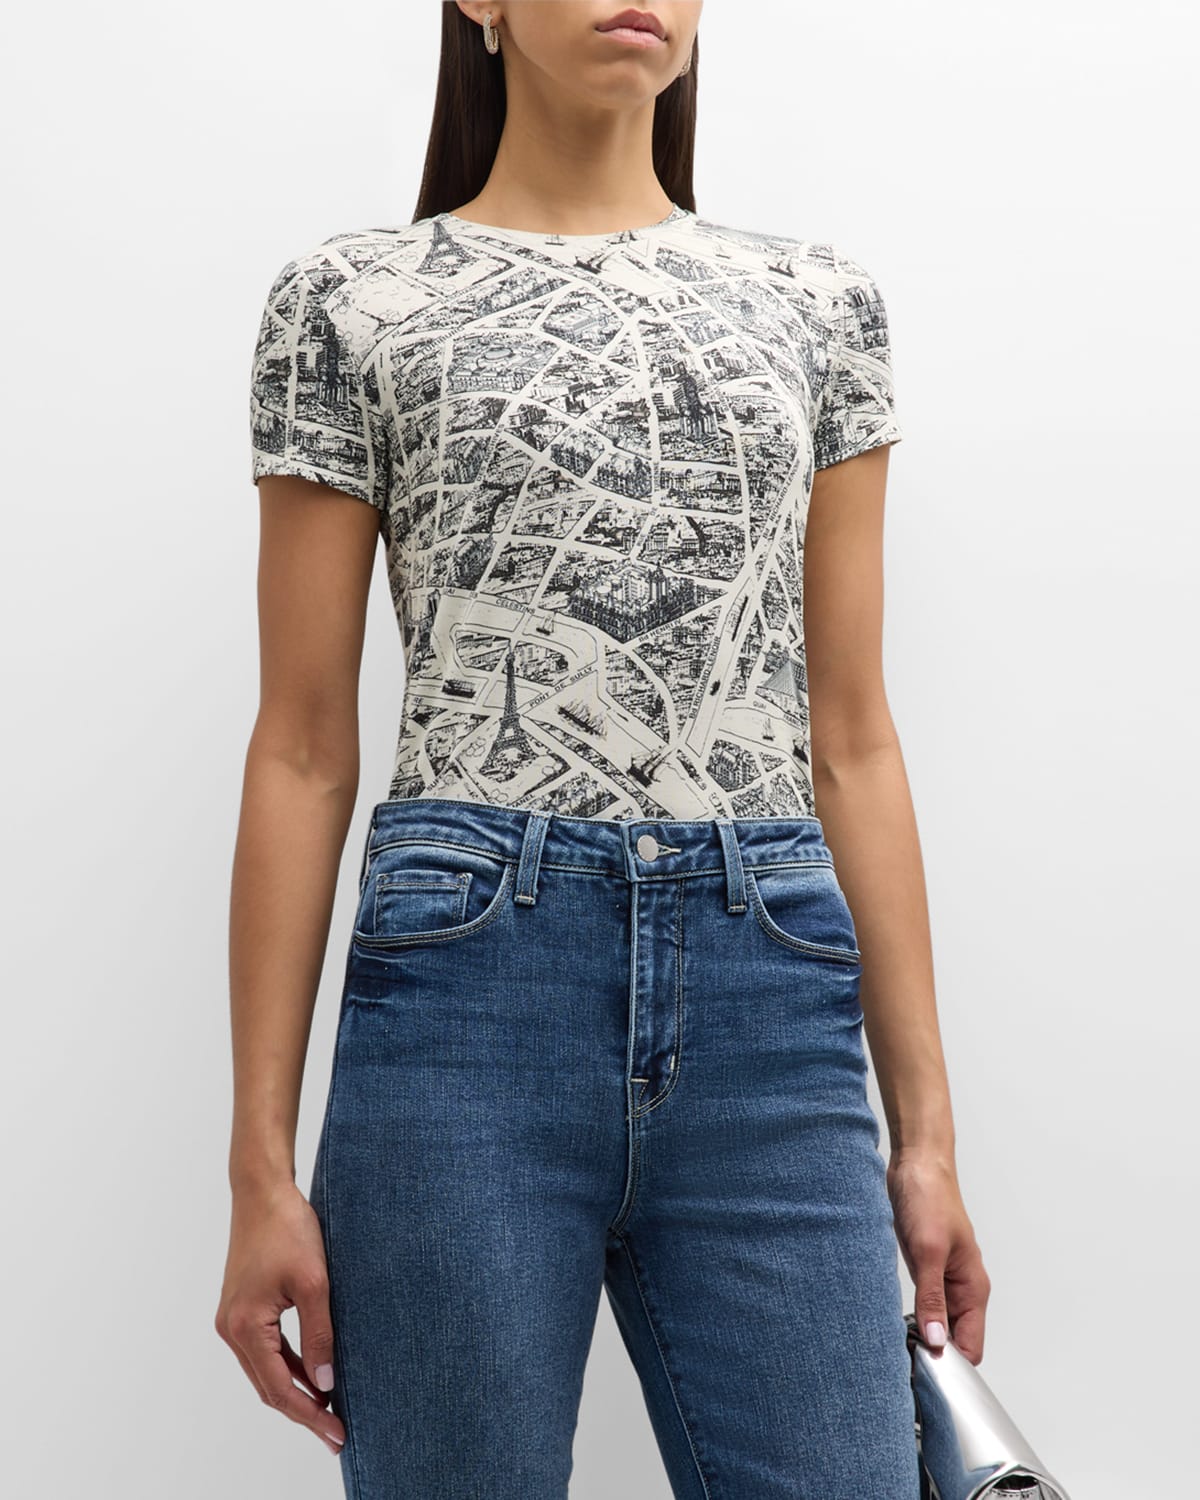 L AGENCE RESSI SHORT-SLEEVE MAP OF PARIS TEE